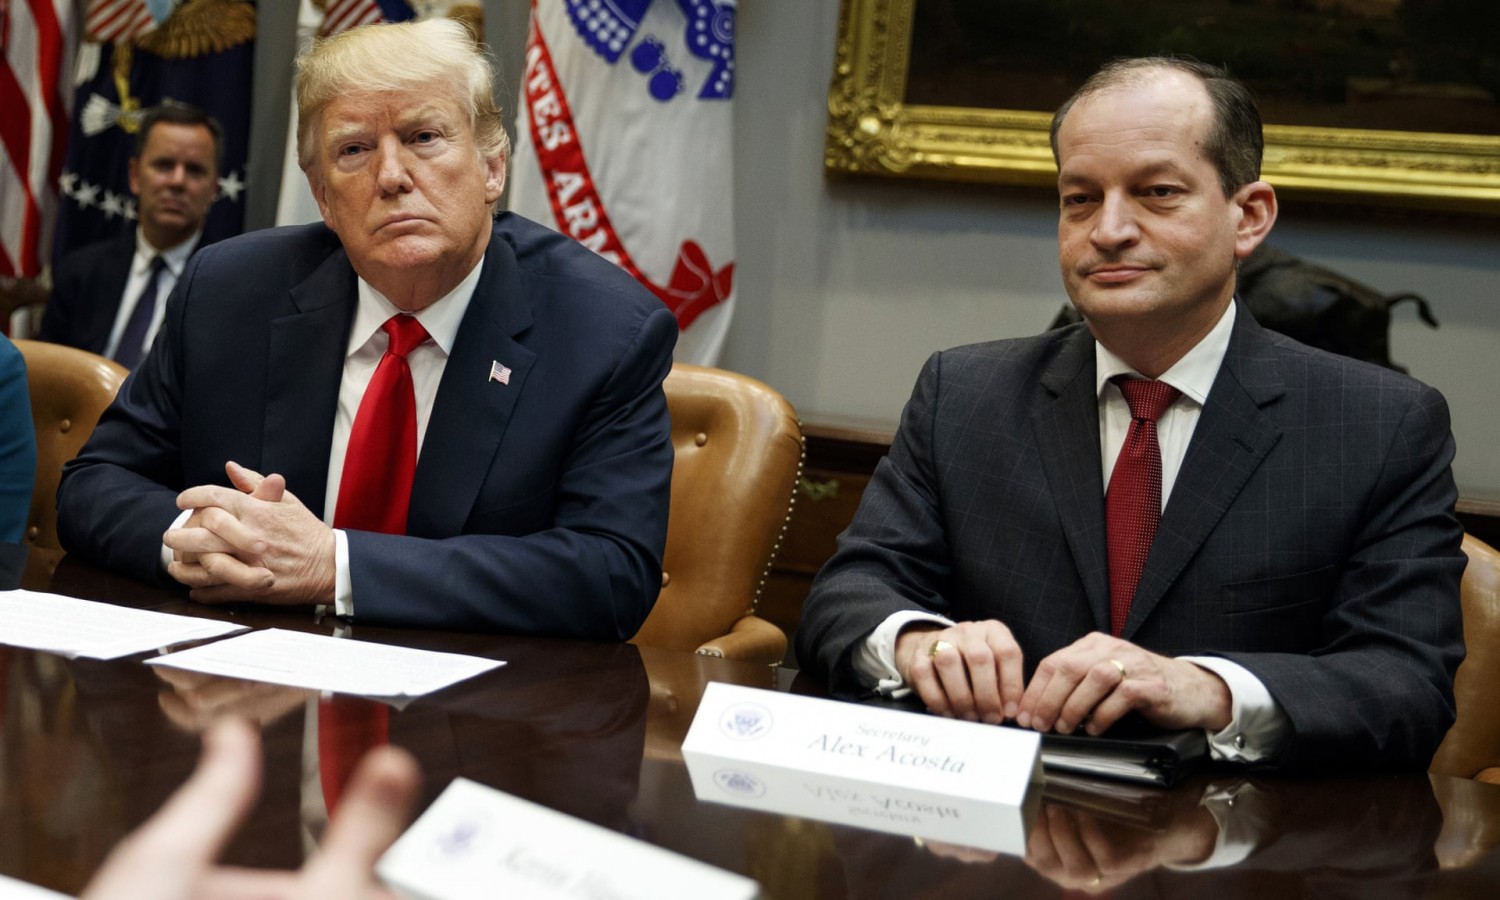 Us labor secretary Alexander Acosta has proposed a drastic cut to the International Labor Affairs Bureau that experts say would put the lives of children at risk. Photograph: Evan Vucci/AP